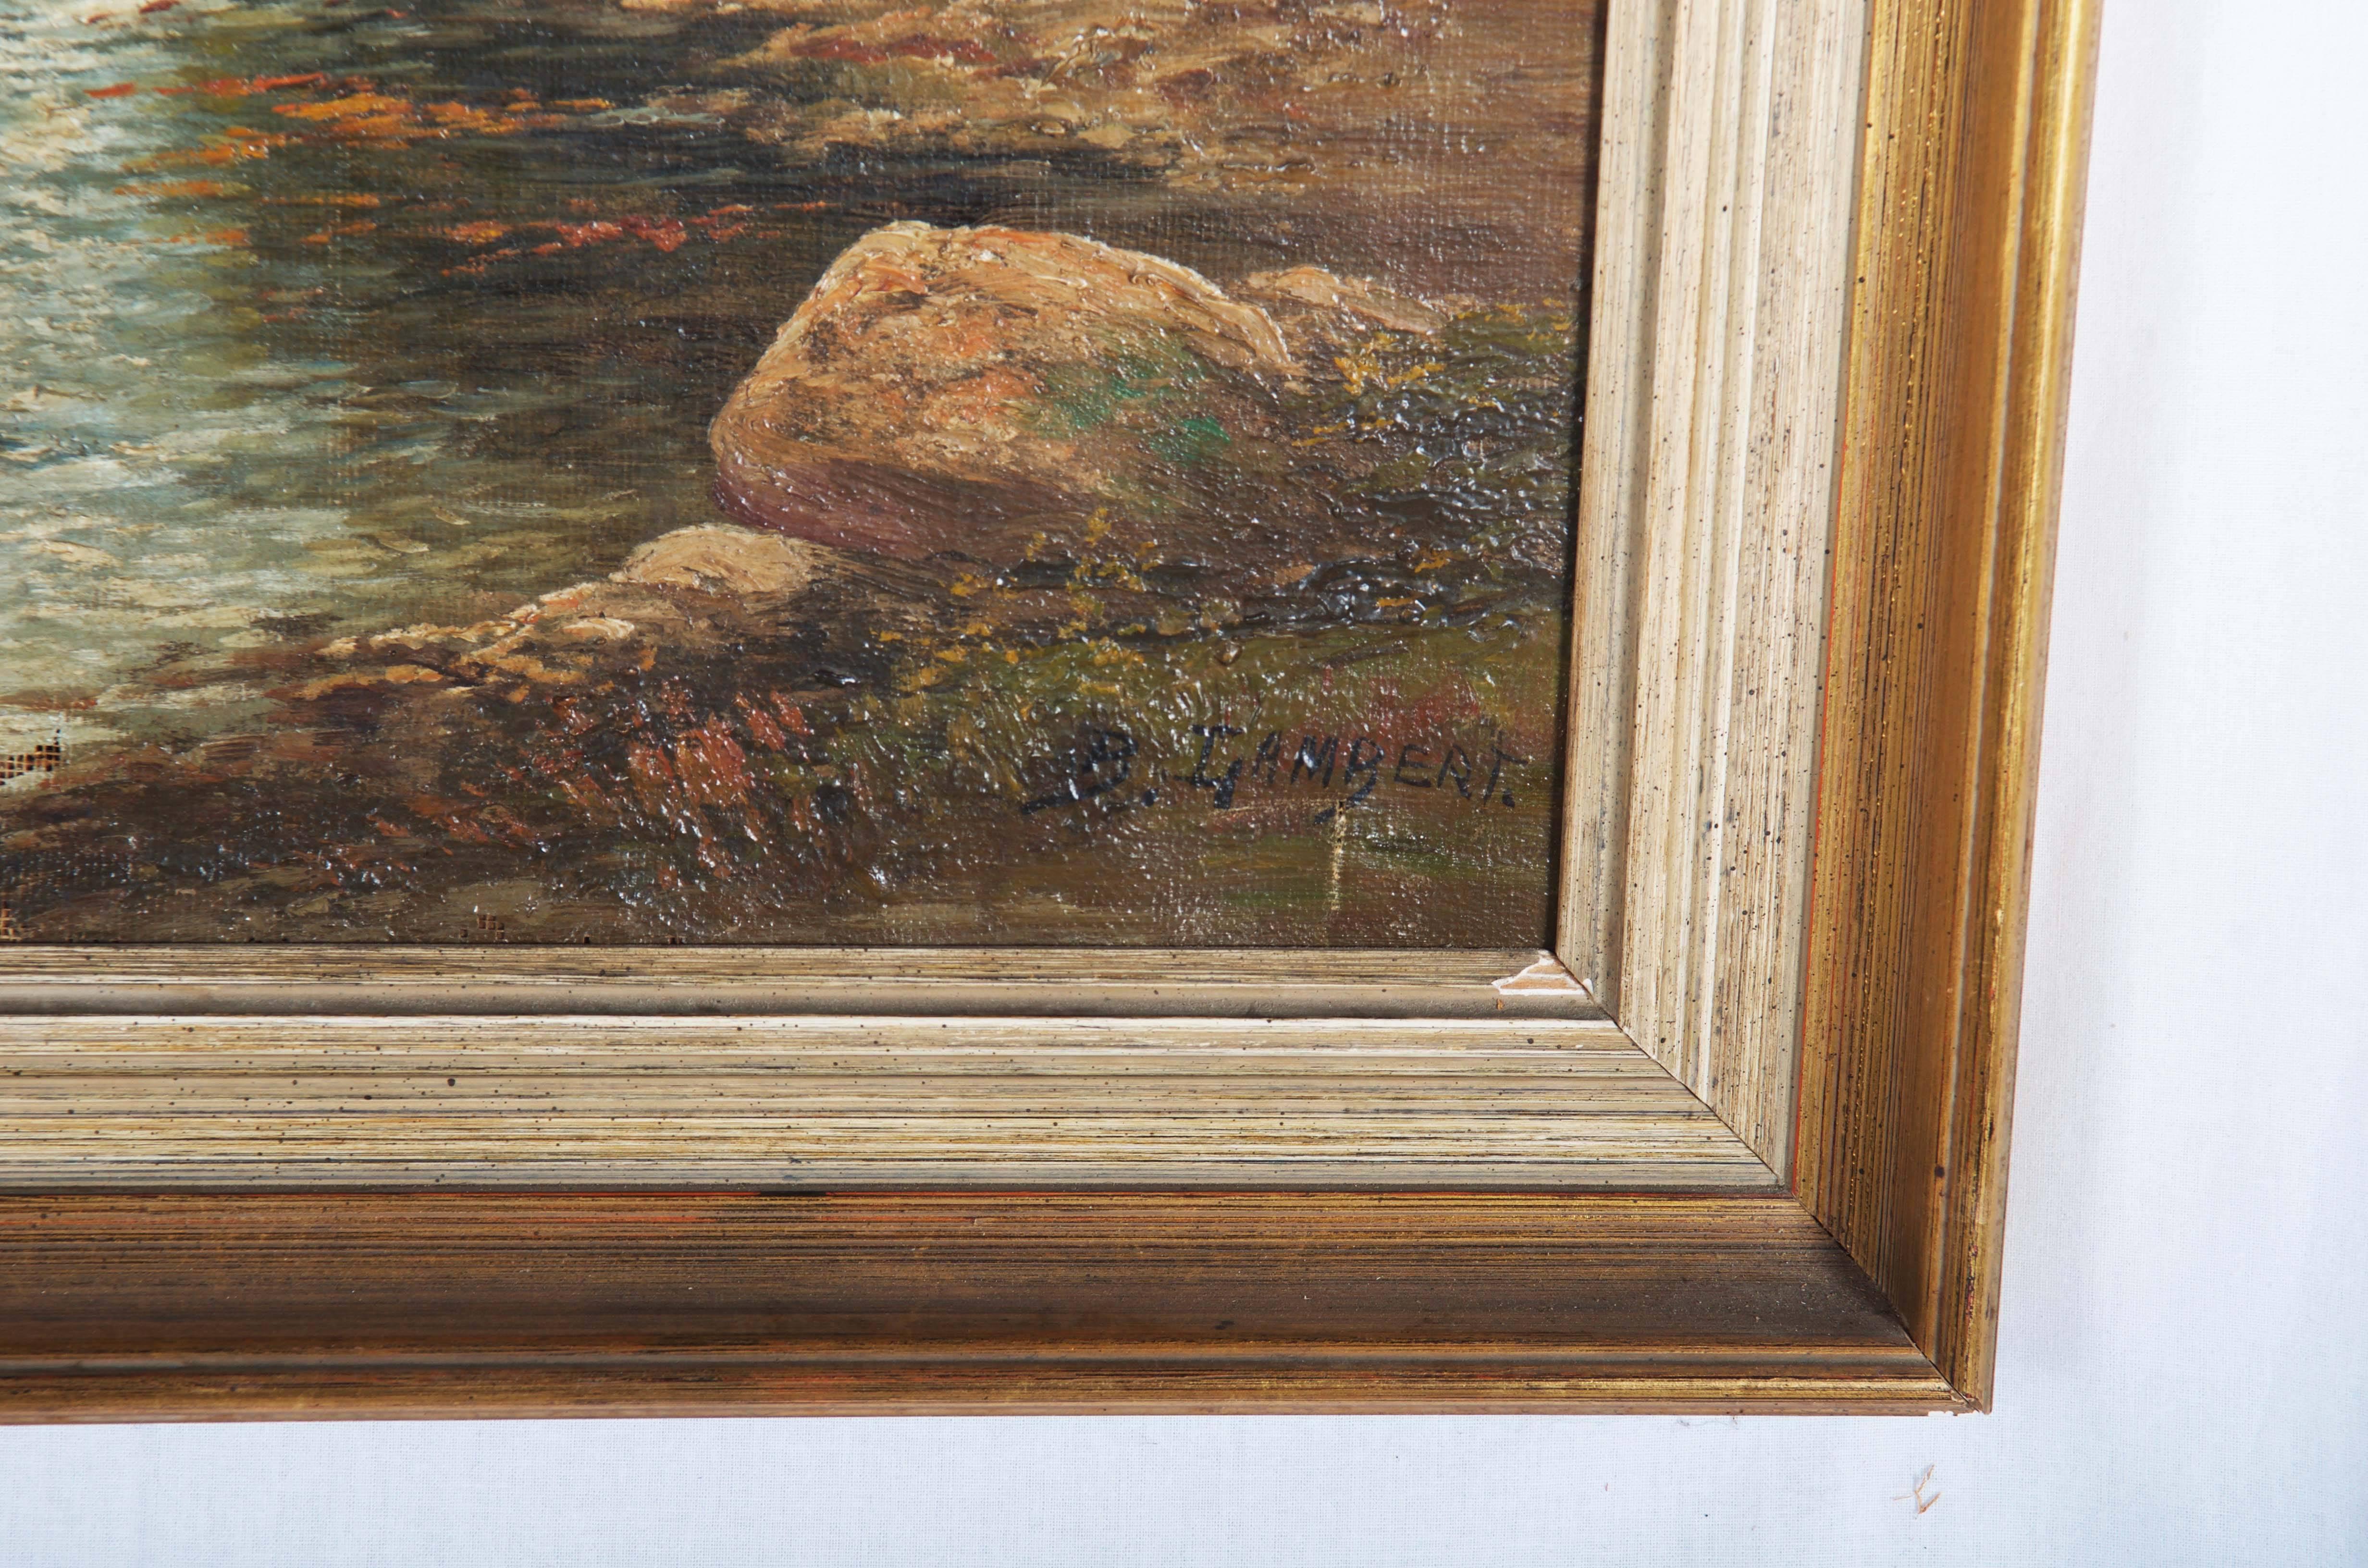 Oil painting by Kal Kaufmann (signed B. Lambert (1843 - 1901))
Autumn landscape (forest scene) with river
The outer frame measures 92 x 45cm. The actual picture is 82 x 35cm big. Small damage should be restored.
  